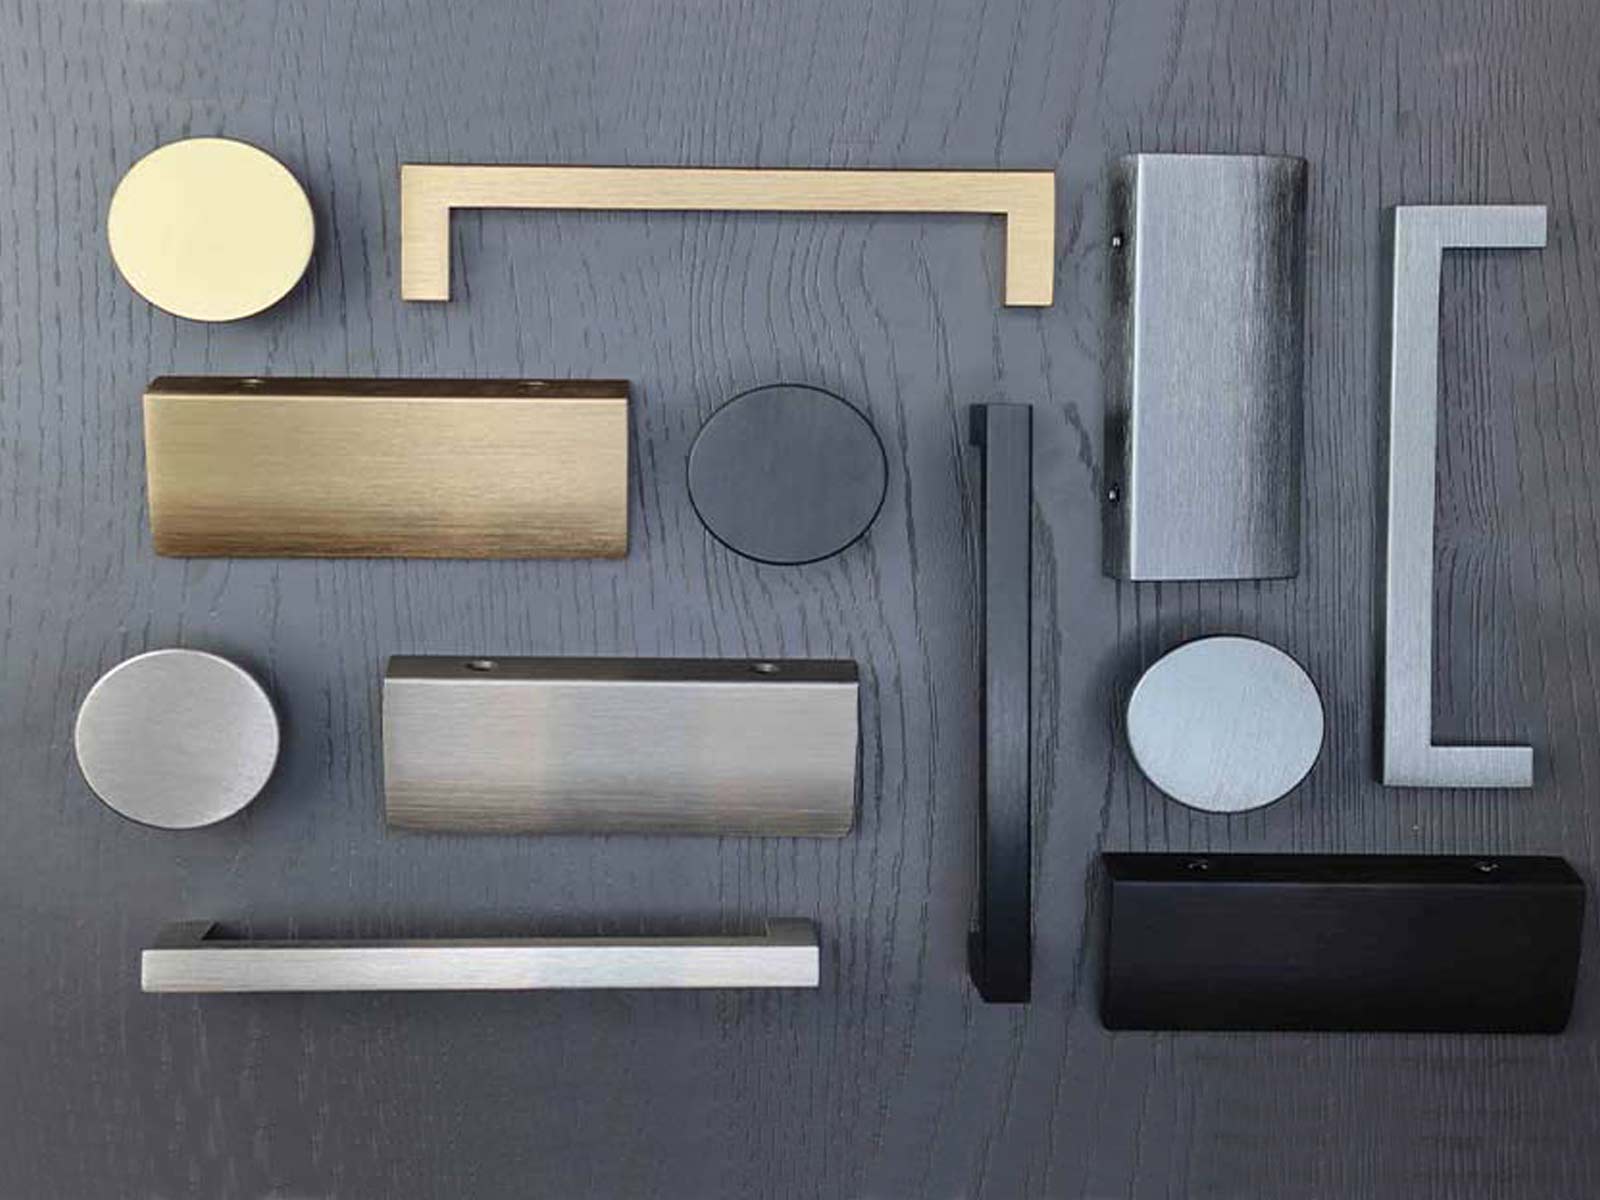 Modern kitchen cabinet handles in brushed metallic finishes